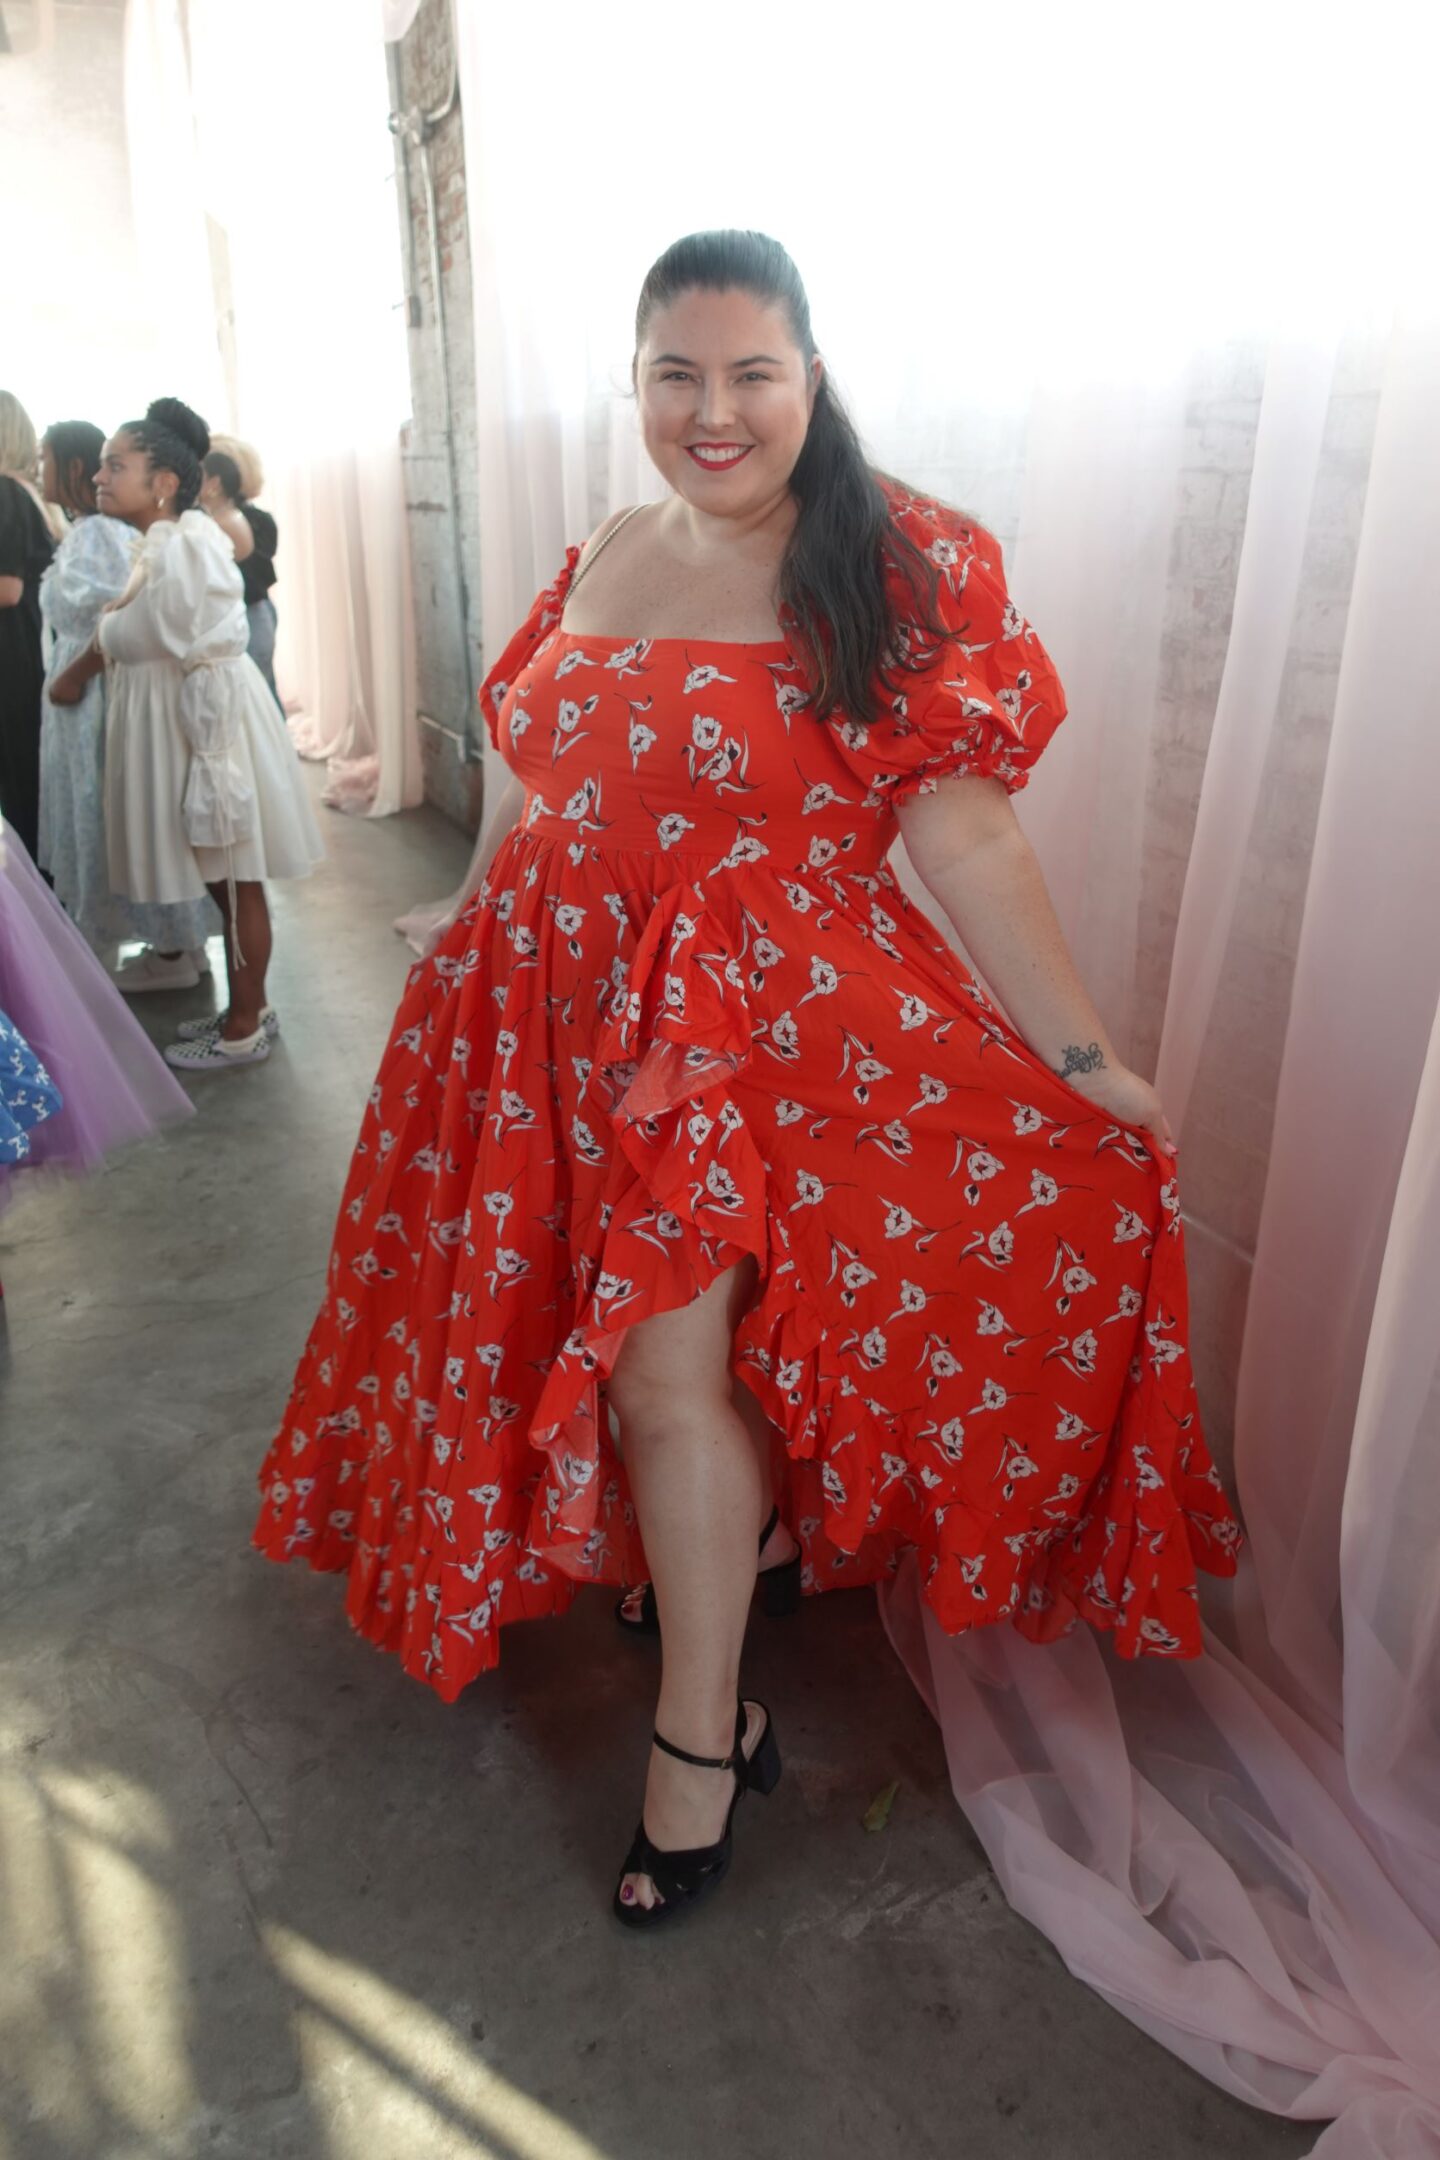 plus size women in a red floral printed ruffle dress